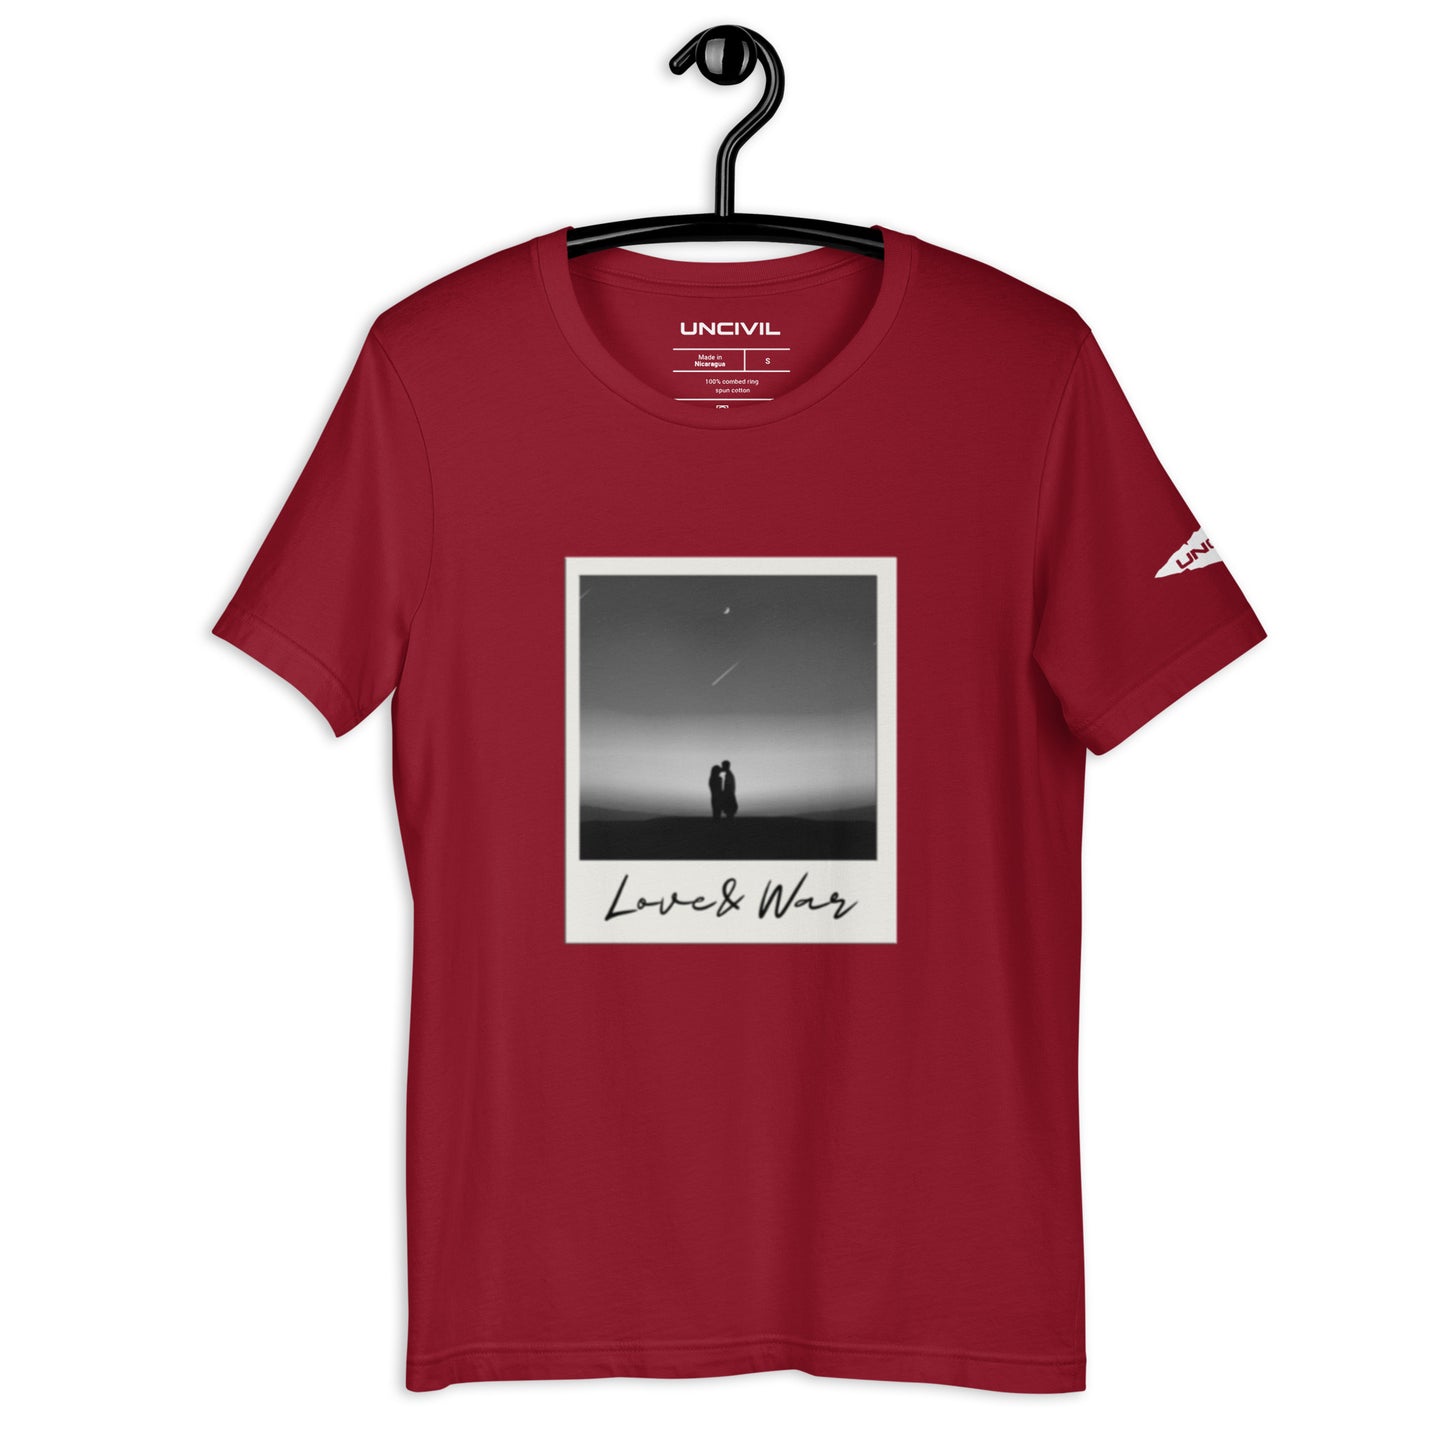 Love and War shirt. Featuring a Polaroid photo of a couple in black and white. Deep Red unisex shirt.